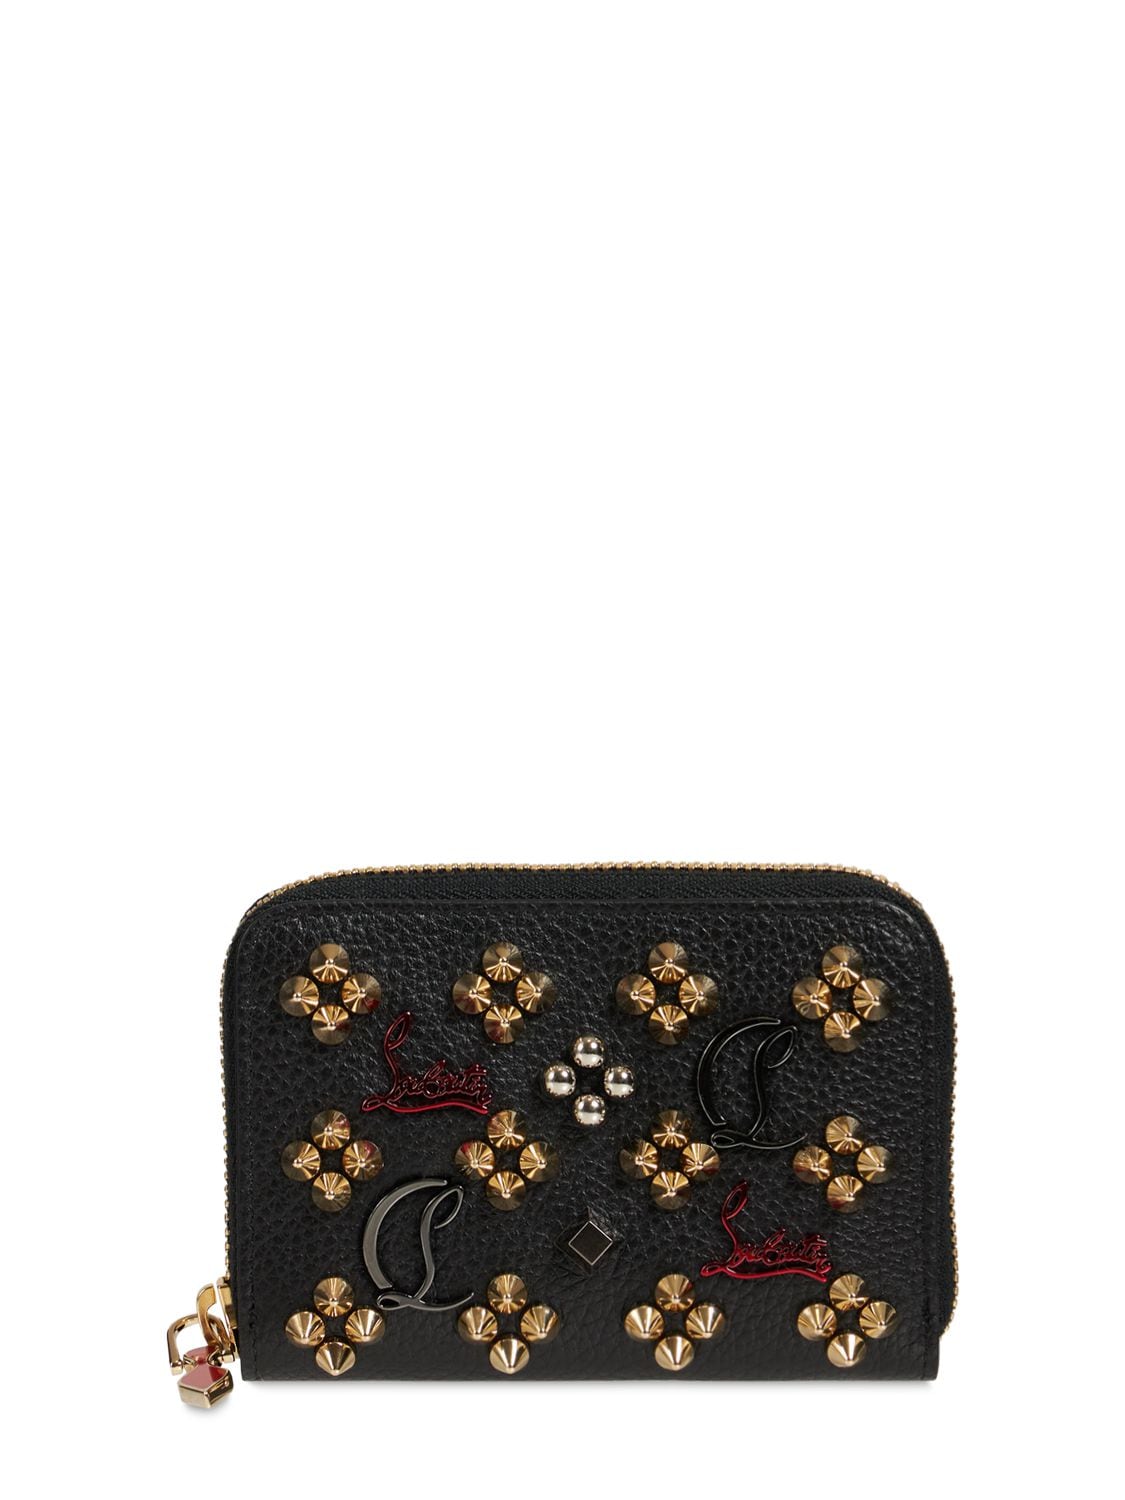 Christian Louboutin - Panettone studded leather coin purse - Black ...